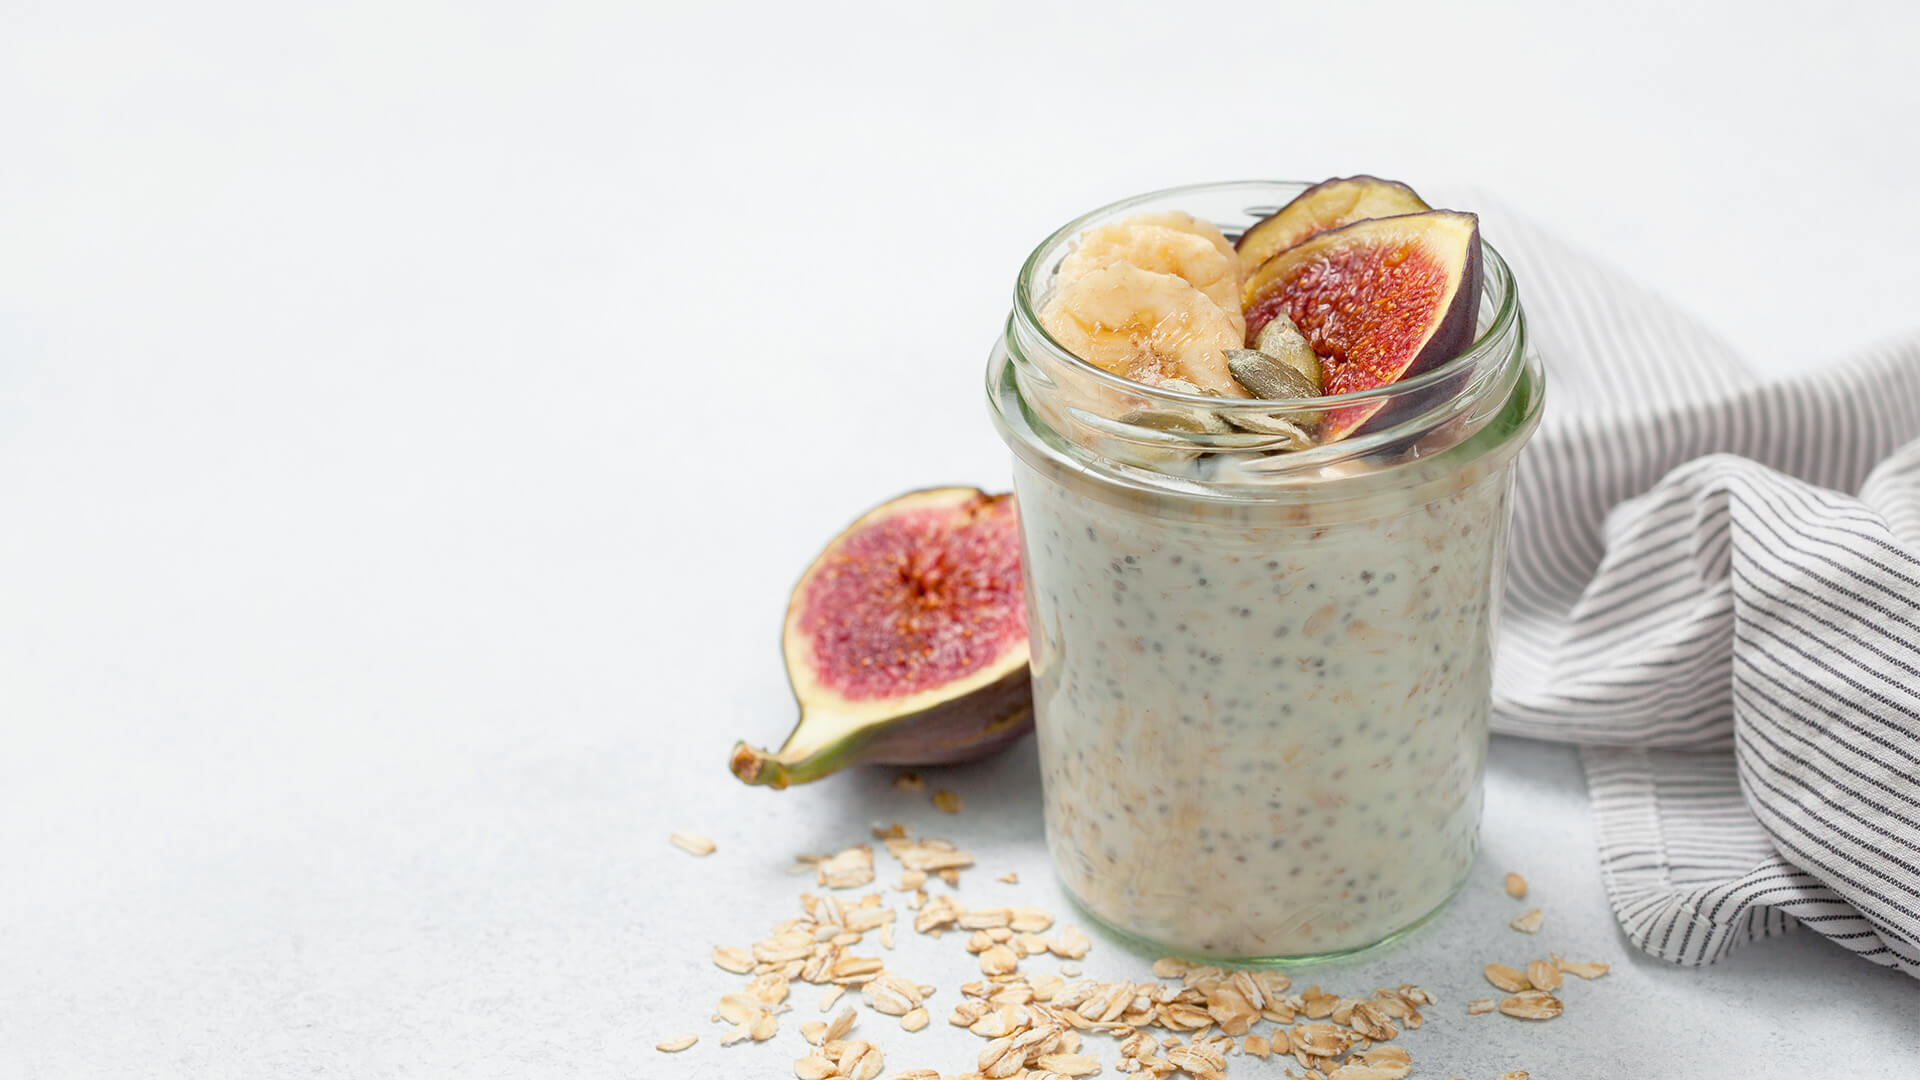 Make your own Overnight Oats - basic recipe and tips - Verival Blog